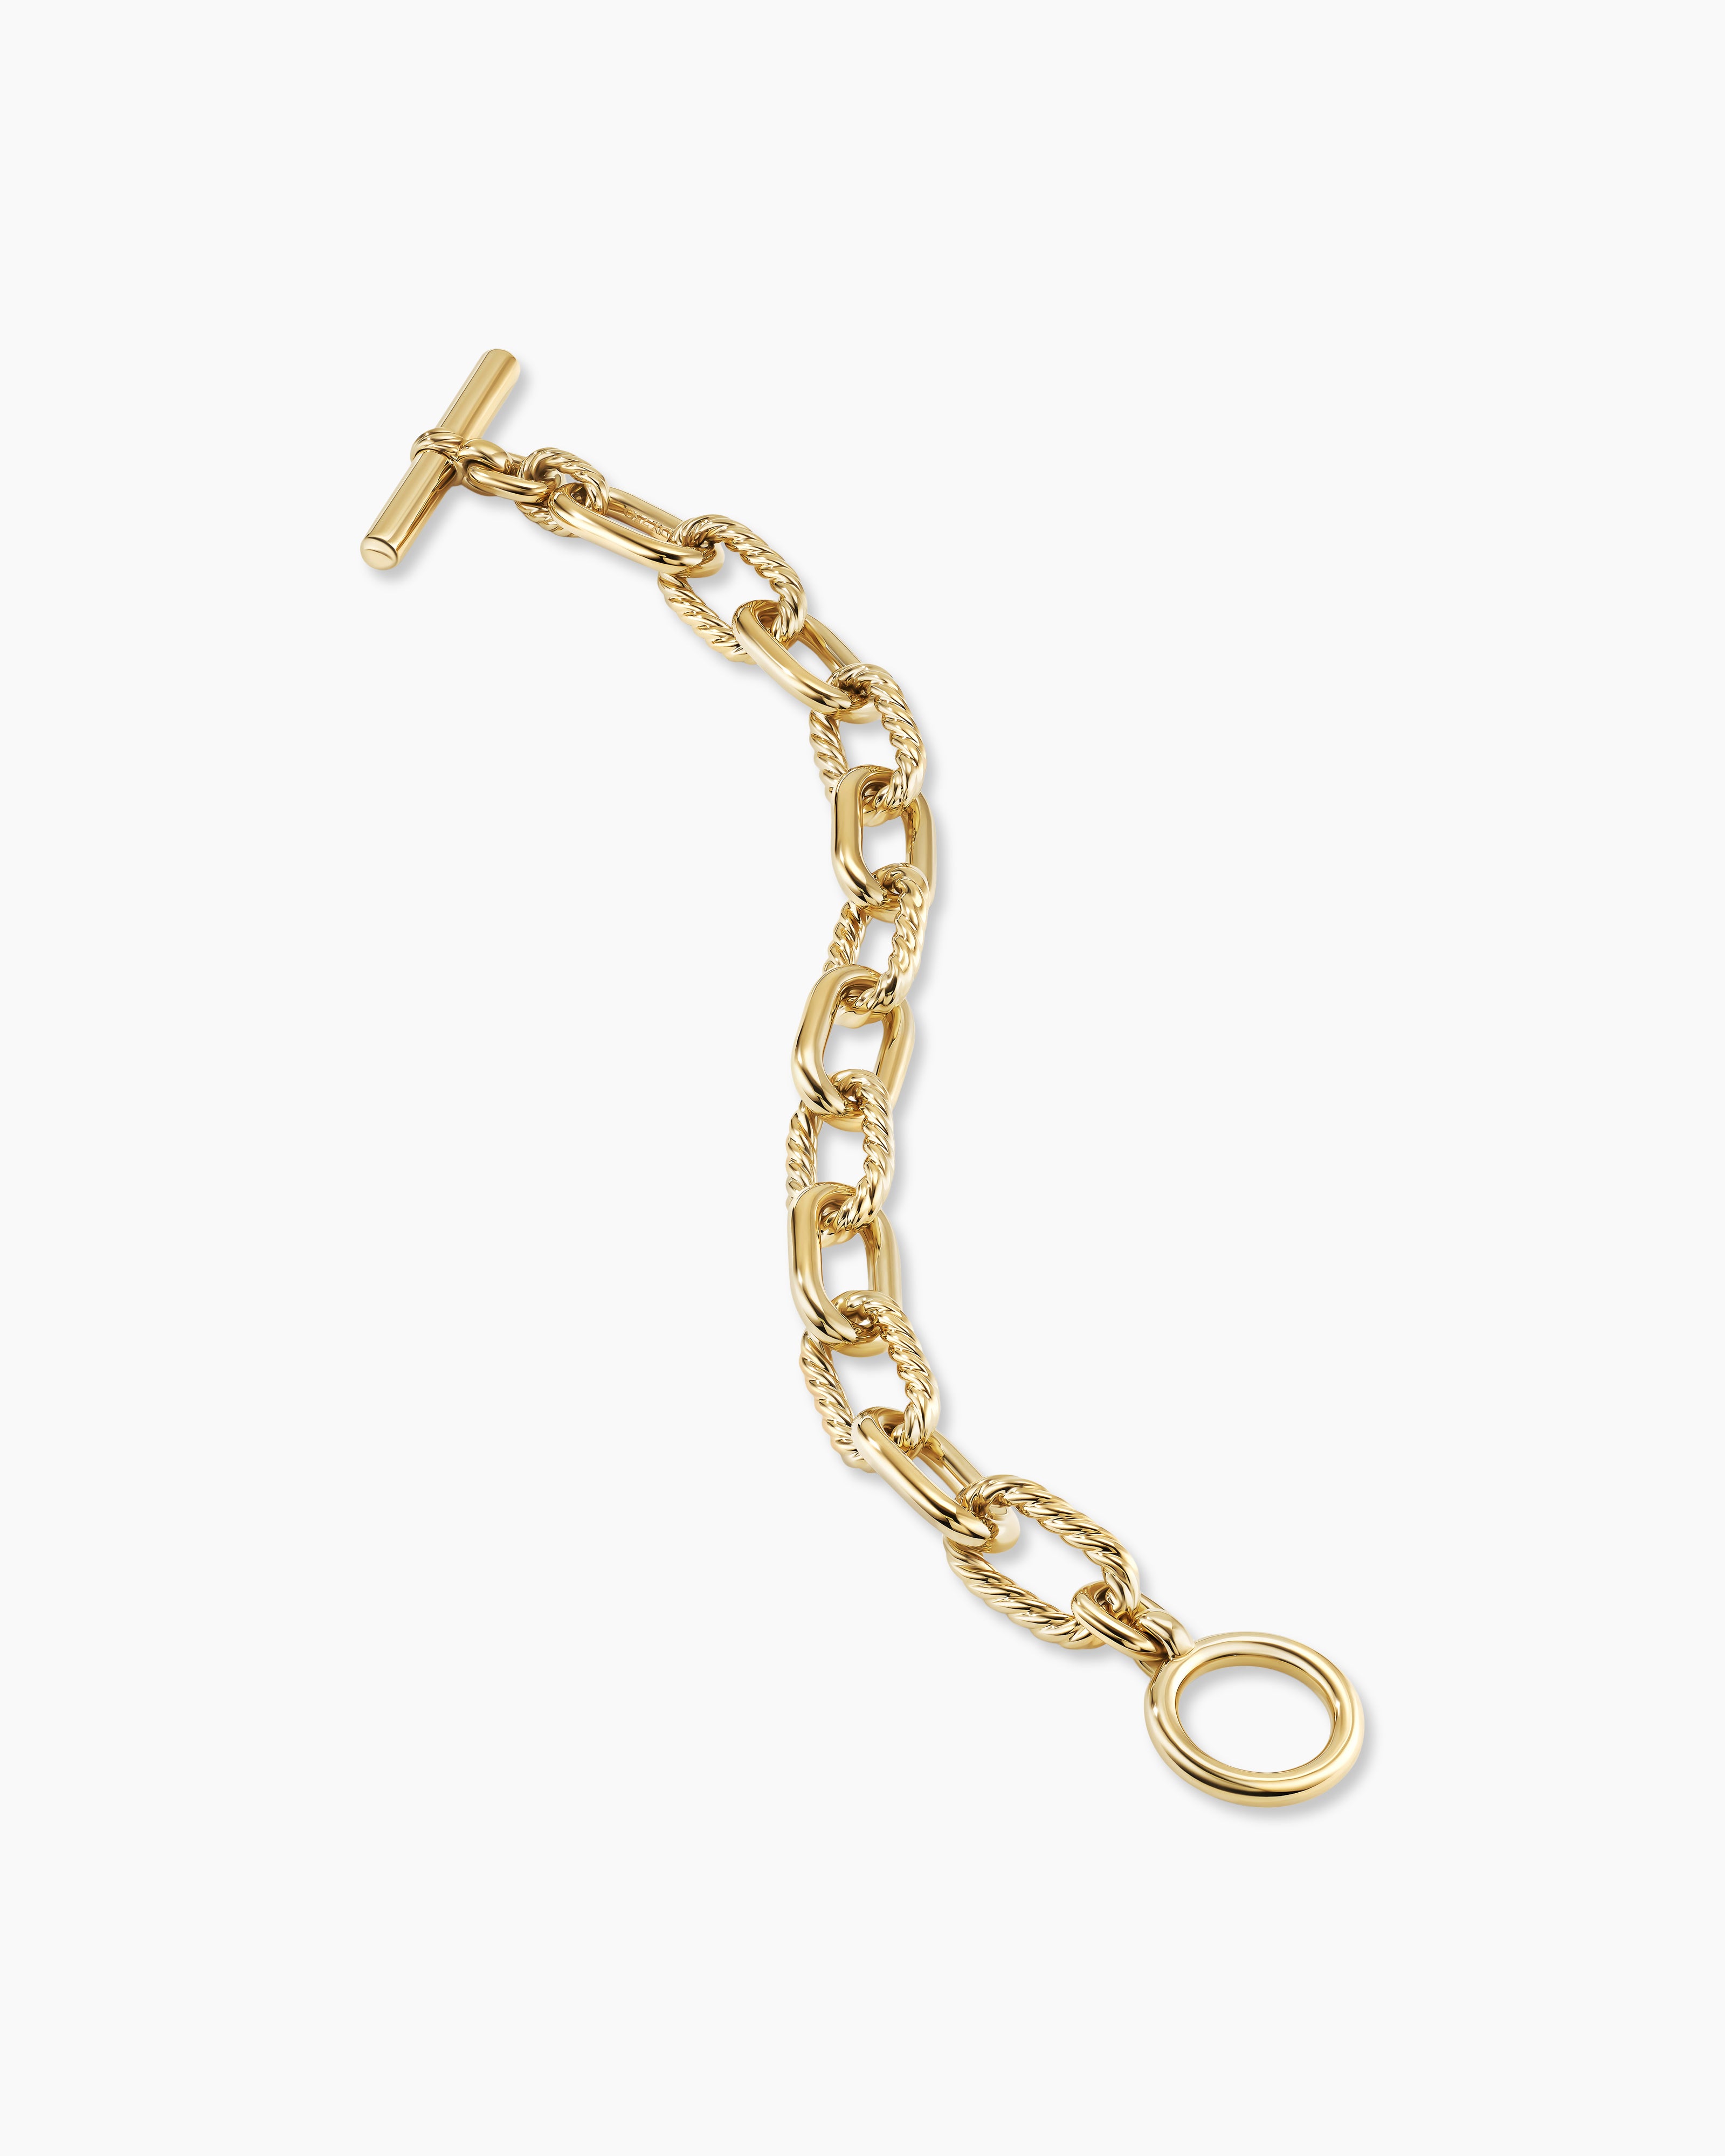 DY Madison Toggle Chain Bracelet in 18K Yellow Gold, 11mm